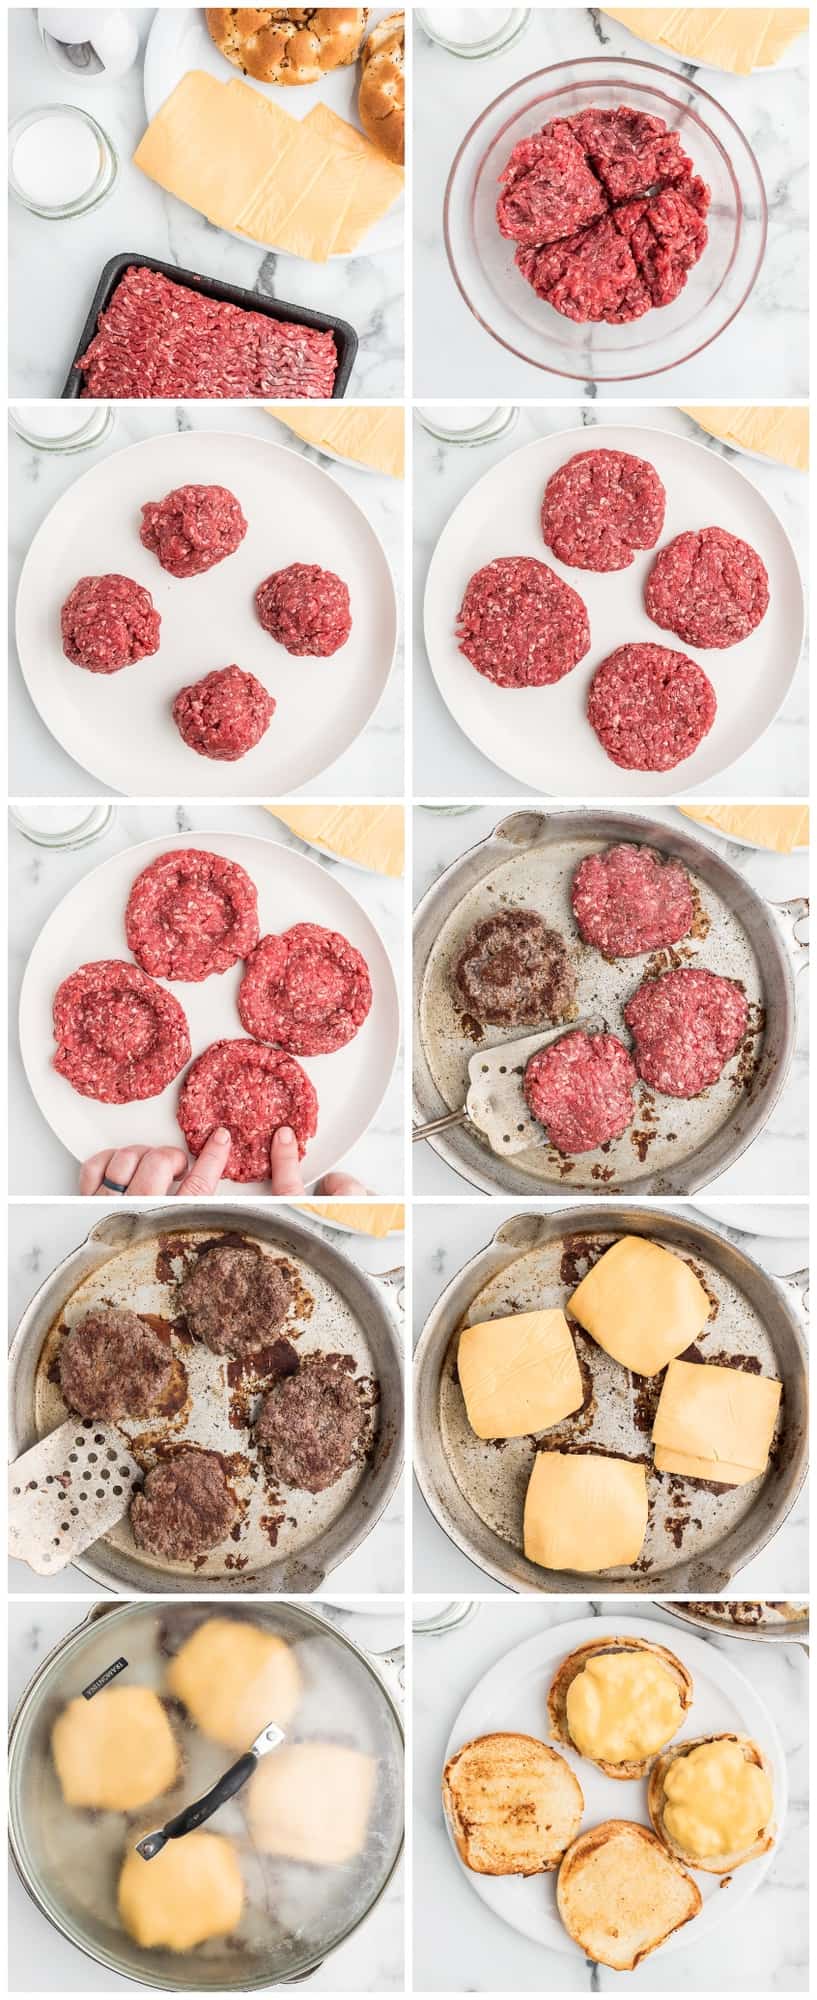 stovetop burgers step by step process shots